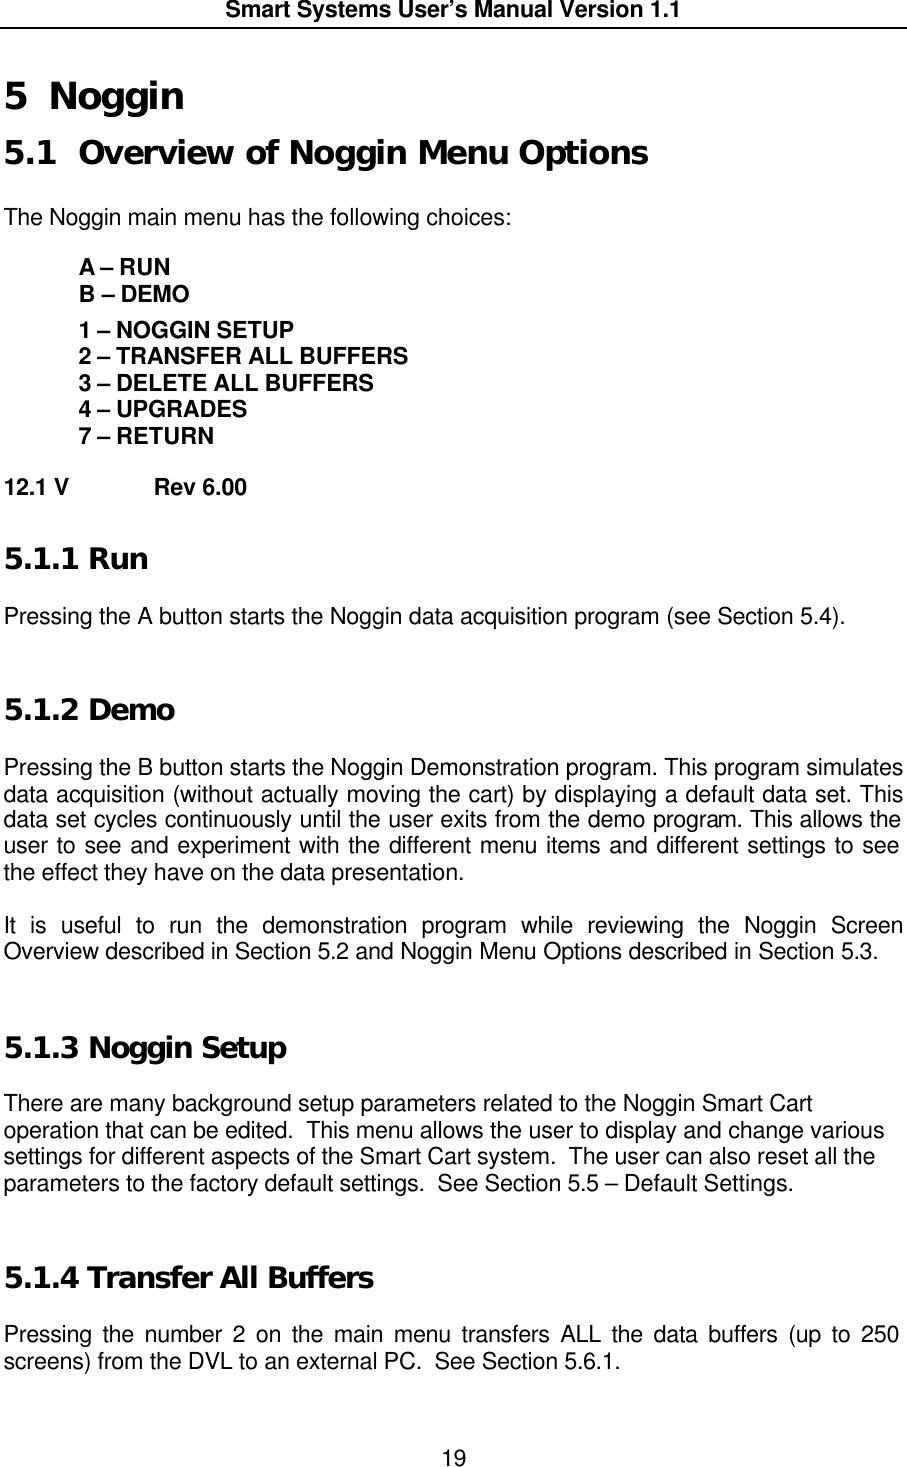  Smart Systems User’s Manual Version 1.1  19  5 Noggin 5.1 Overview of Noggin Menu Options  The Noggin main menu has the following choices:   A – RUN  B – DEMO   1 – NOGGIN SETUP  2 – TRANSFER ALL BUFFERS  3 – DELETE ALL BUFFERS  4 – UPGRADES  7 – RETURN  12.1 V   Rev 6.00 5.1.1  Run  Pressing the A button starts the Noggin data acquisition program (see Section 5.4).  5.1.2  Demo  Pressing the B button starts the Noggin Demonstration program. This program simulates data acquisition (without actually moving the cart) by displaying a default data set. This data set cycles continuously until the user exits from the demo program. This allows the user to see and experiment with the different menu items and different settings to see the effect they have on the data presentation.  It is useful to run the demonstration program while reviewing the Noggin Screen Overview described in Section 5.2 and Noggin Menu Options described in Section 5.3.  5.1.3  Noggin Setup  There are many background setup parameters related to the Noggin Smart Cart operation that can be edited.  This menu allows the user to display and change various settings for different aspects of the Smart Cart system.  The user can also reset all the parameters to the factory default settings.  See Section 5.5 – Default Settings.  5.1.4  Transfer All Buffers  Pressing the number 2 on the main menu transfers ALL the data buffers (up to 250 screens) from the DVL to an external PC.  See Section 5.6.1.  